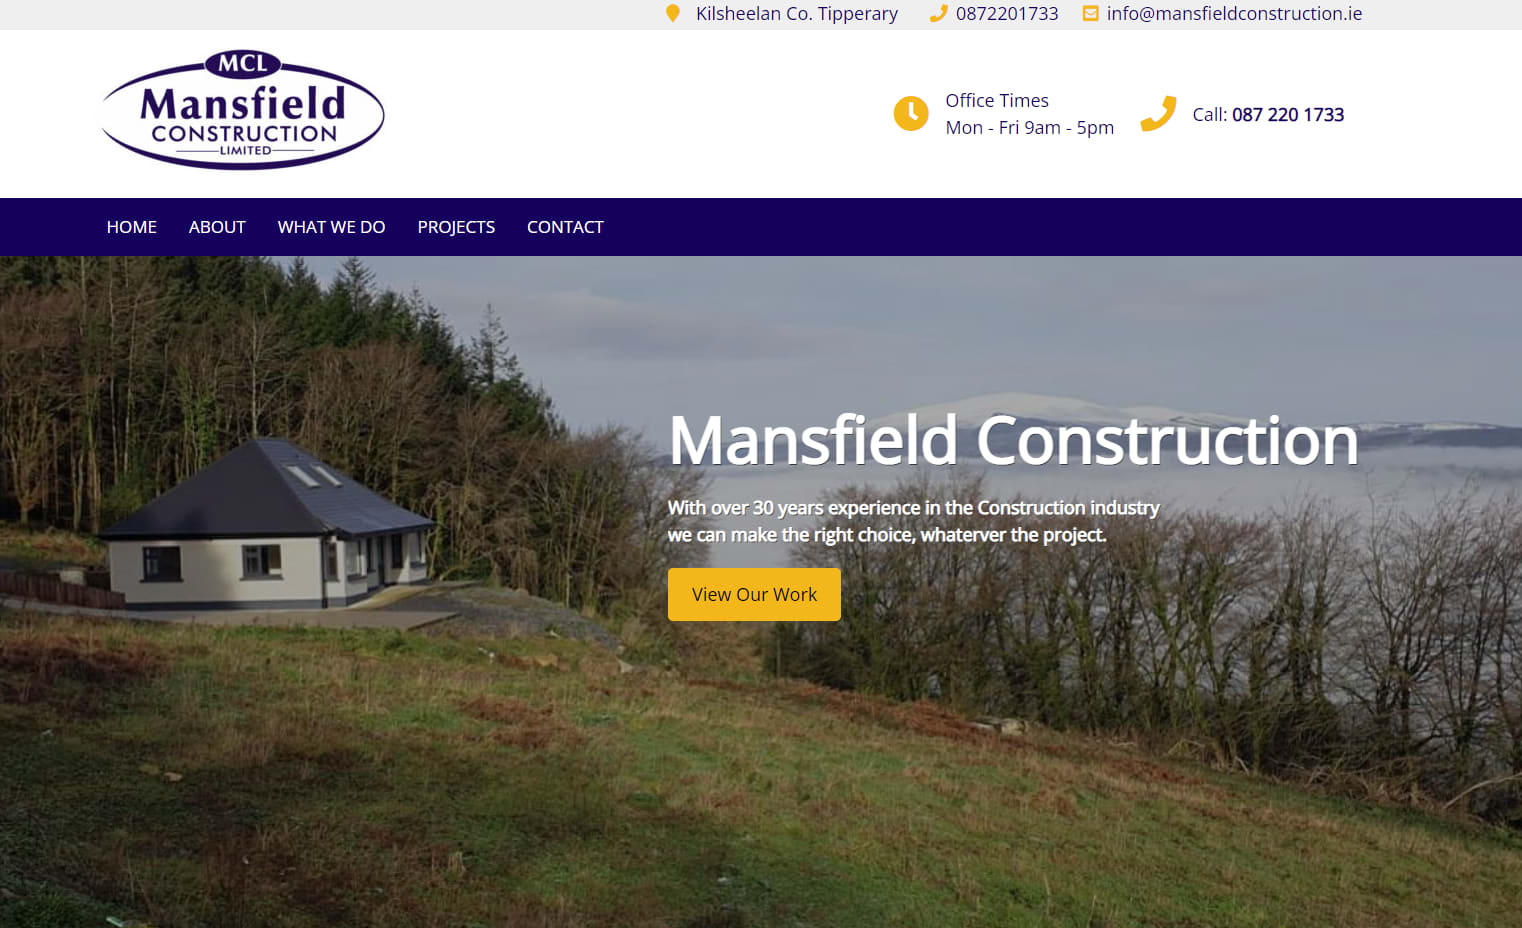 Mansfield Construction website picture